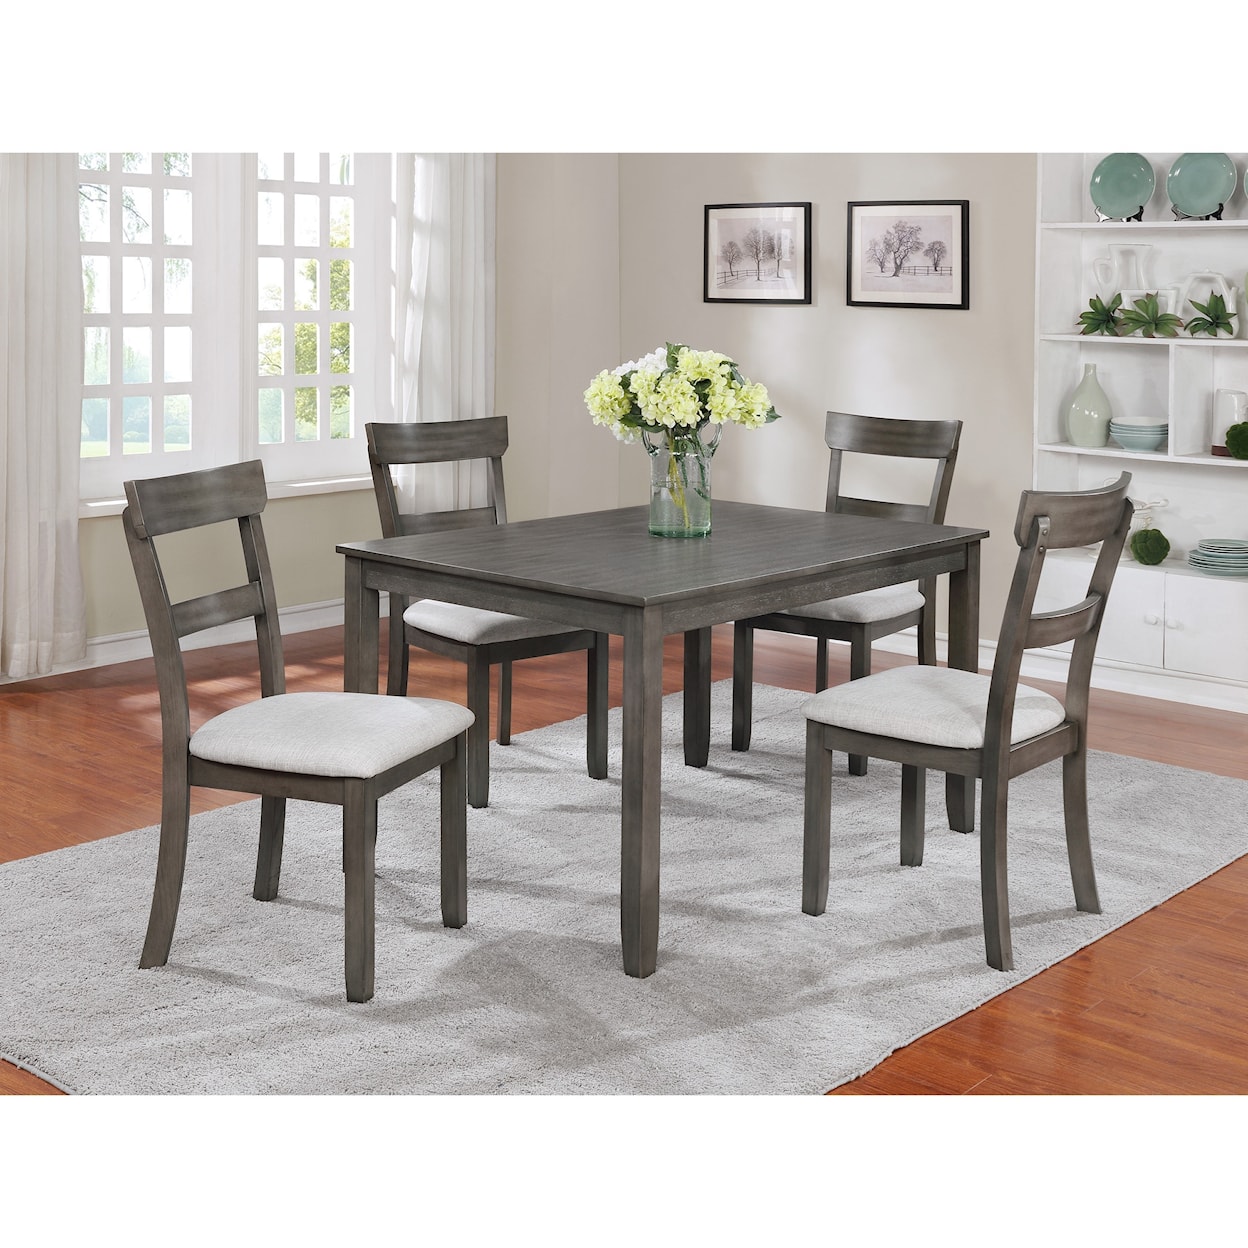 Crown Mark Henderson 5 Piece Dining Table Set